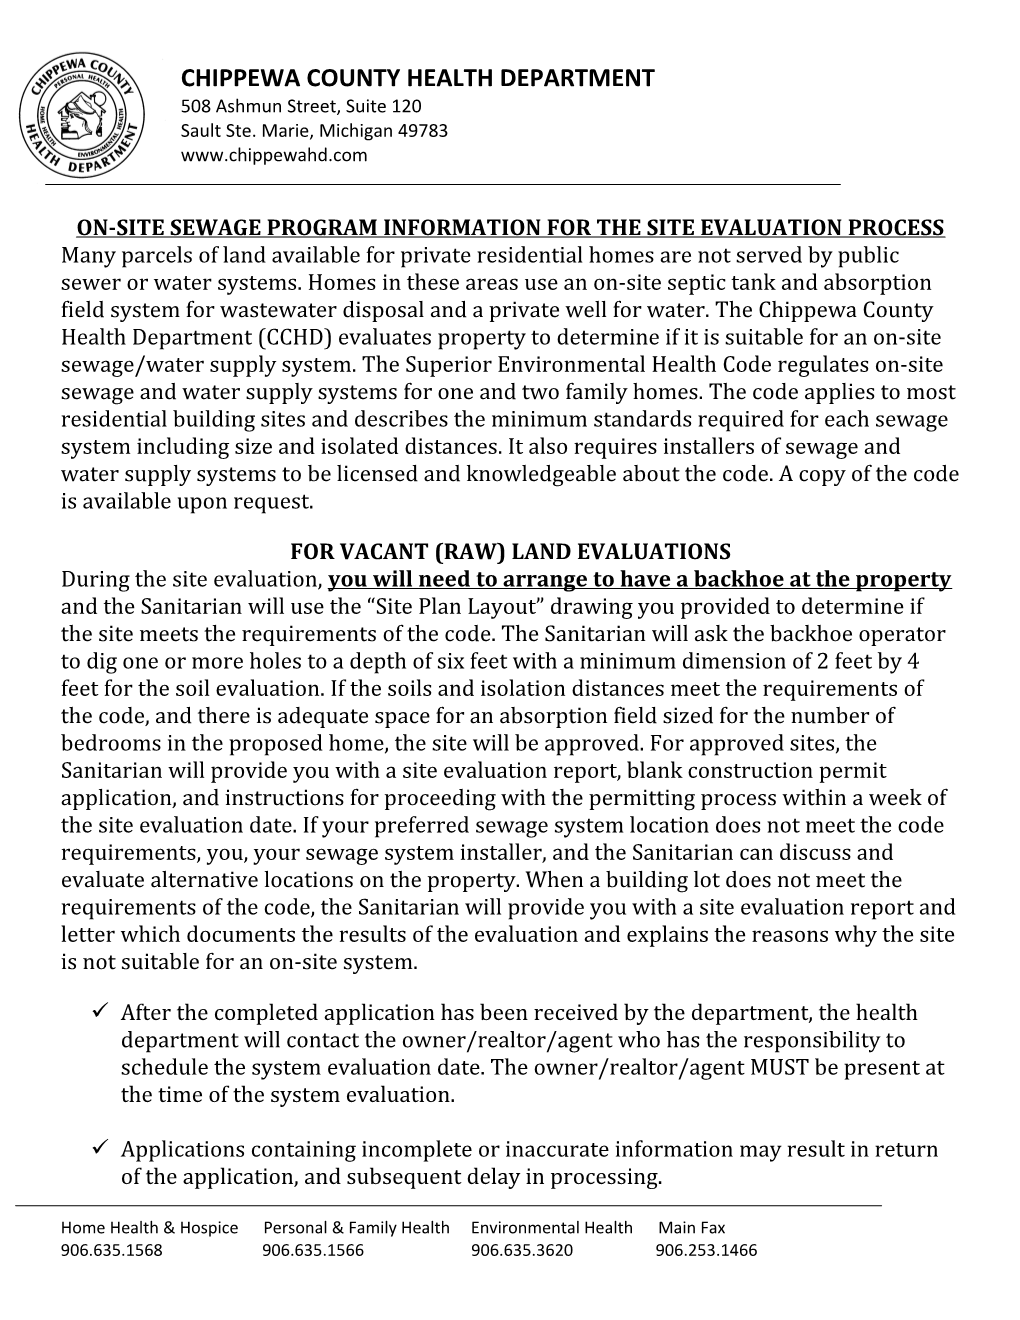 On-Site Sewage Program Information for the Site Evaluation Process